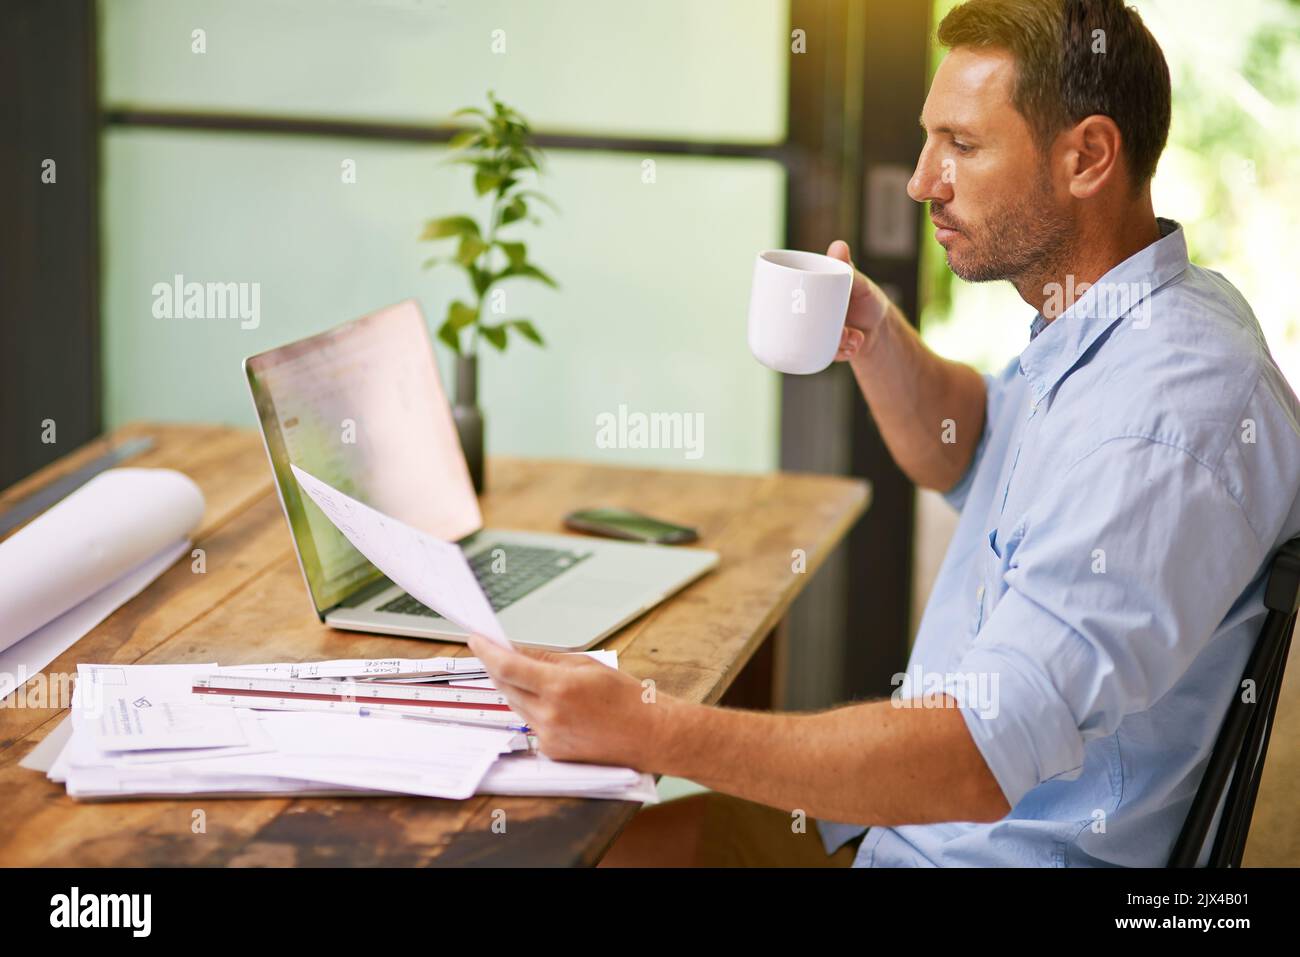 Proof reading the contract in the company of coffee. a young man working from home. Stock Photo